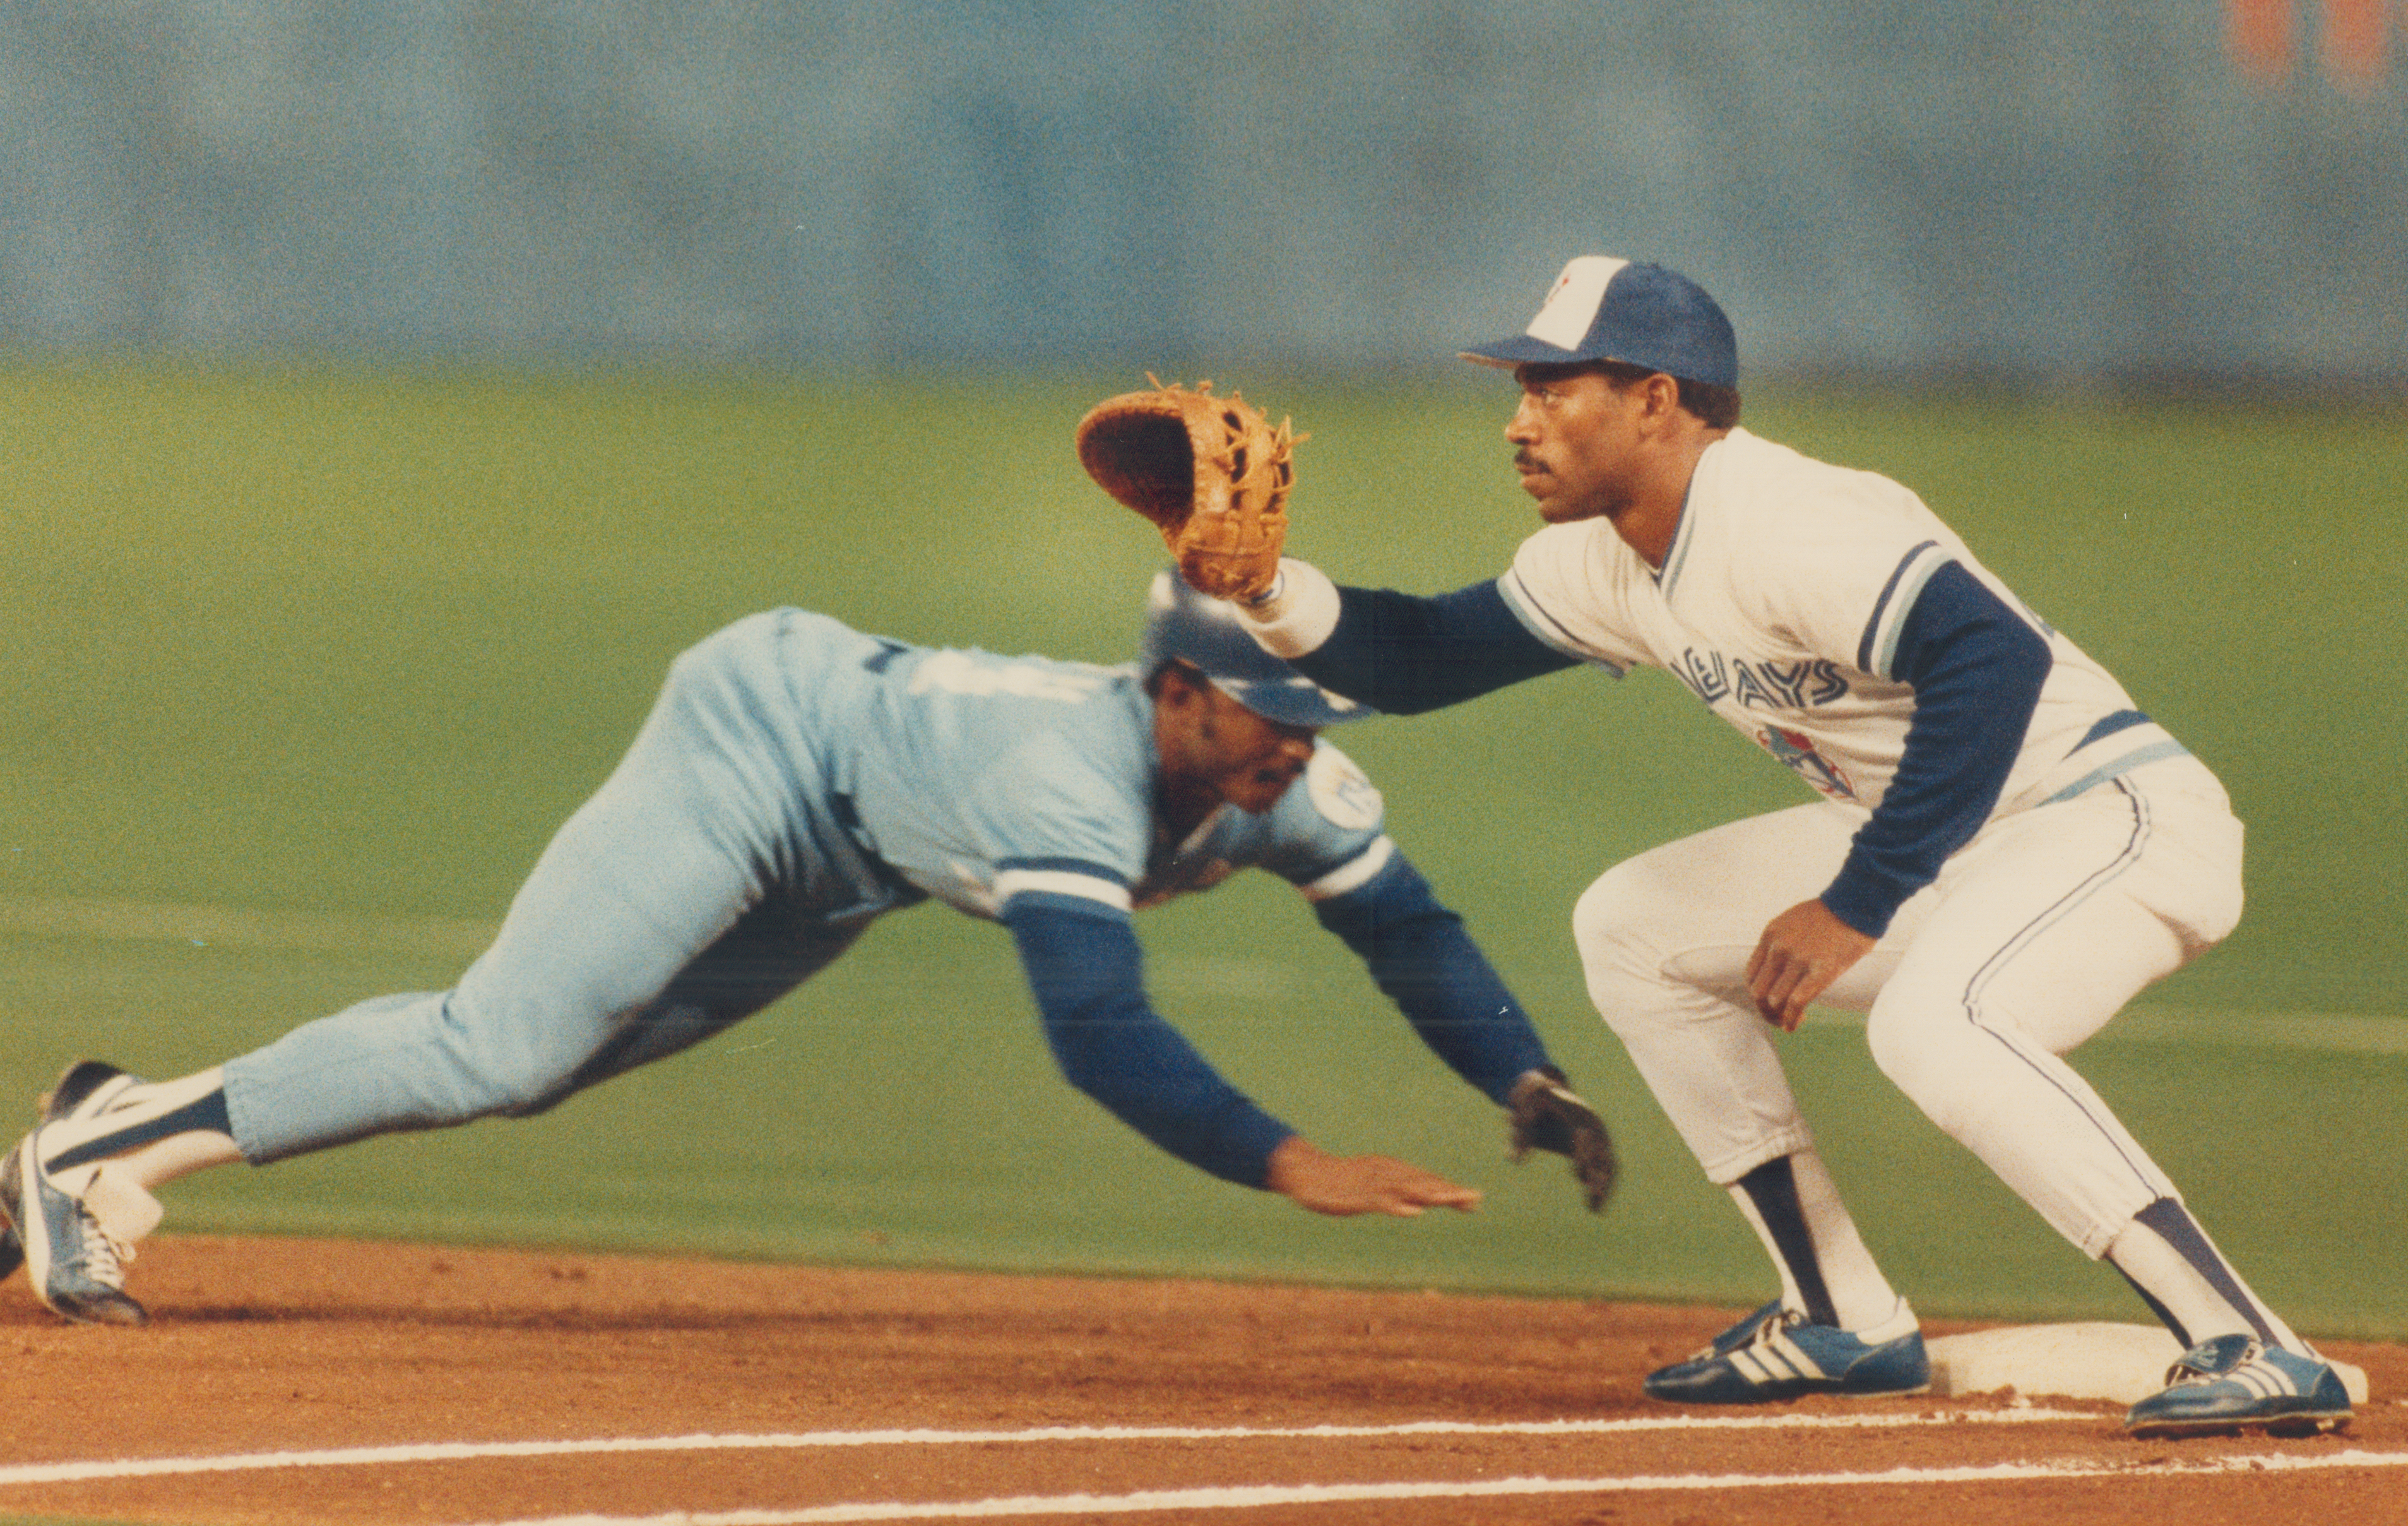 Close enough: Kansas City leftfielder Lonnie Smith does a racing dive to get back to first base on a